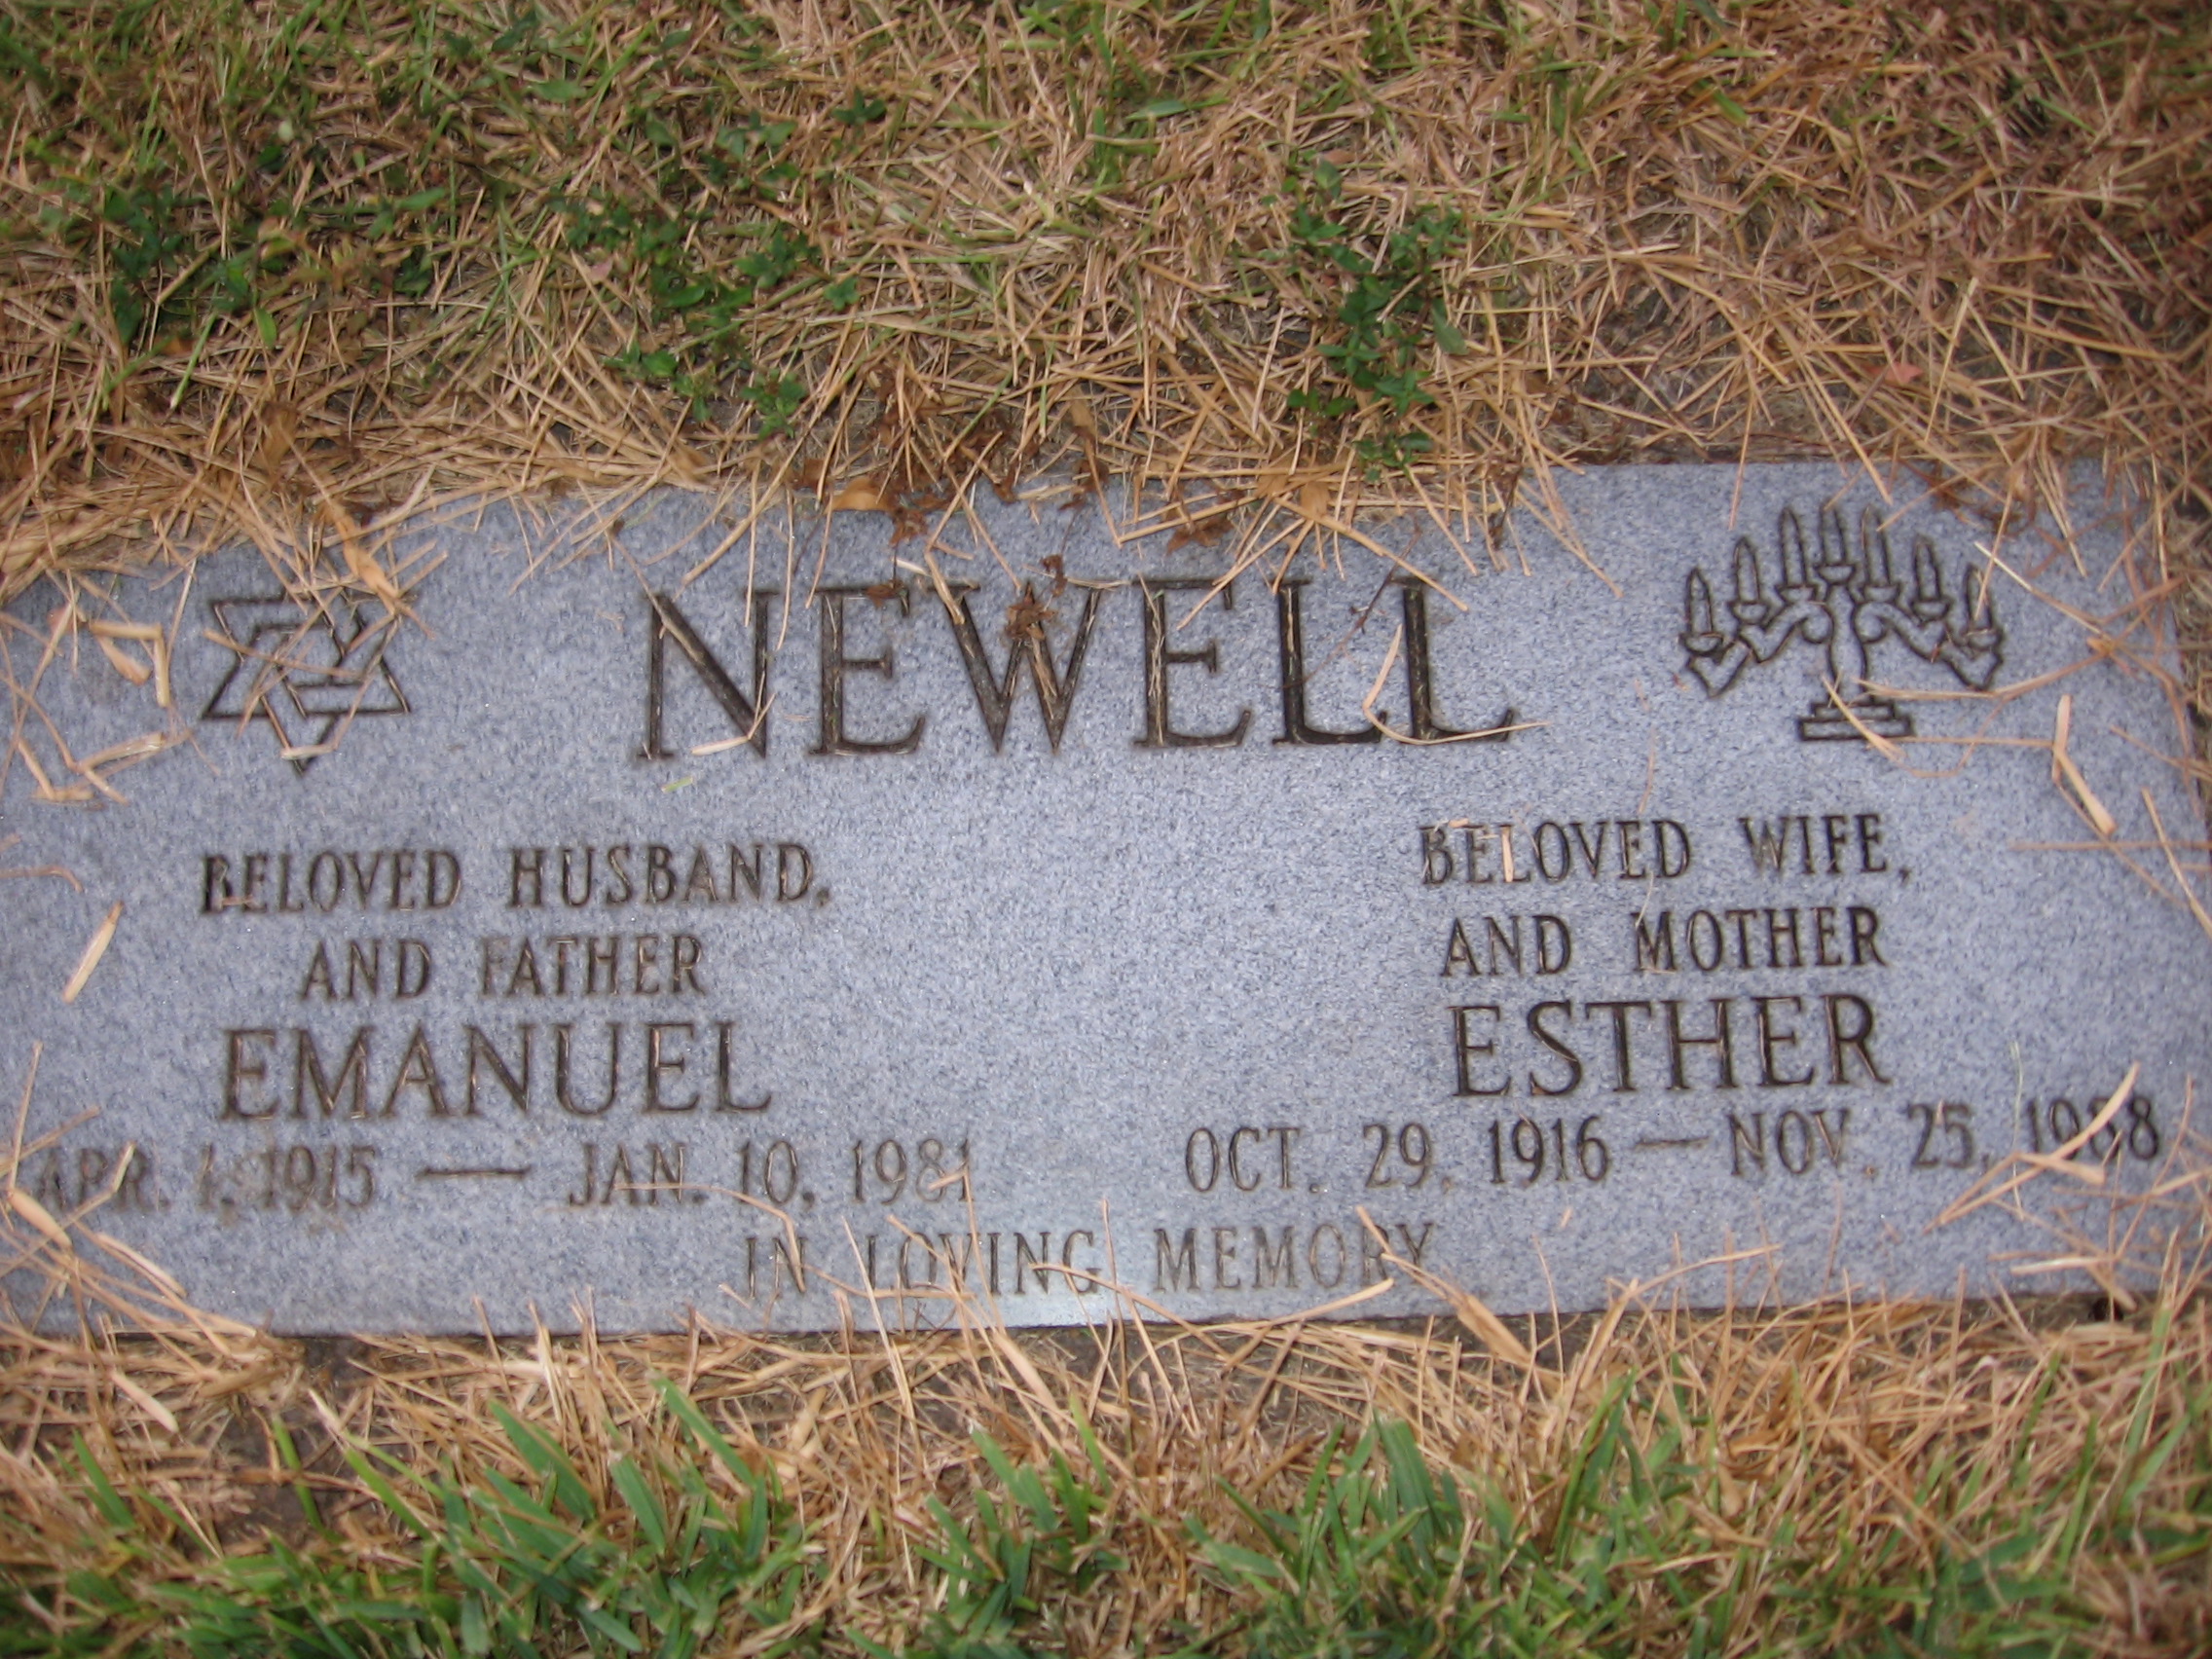 Esther Newell